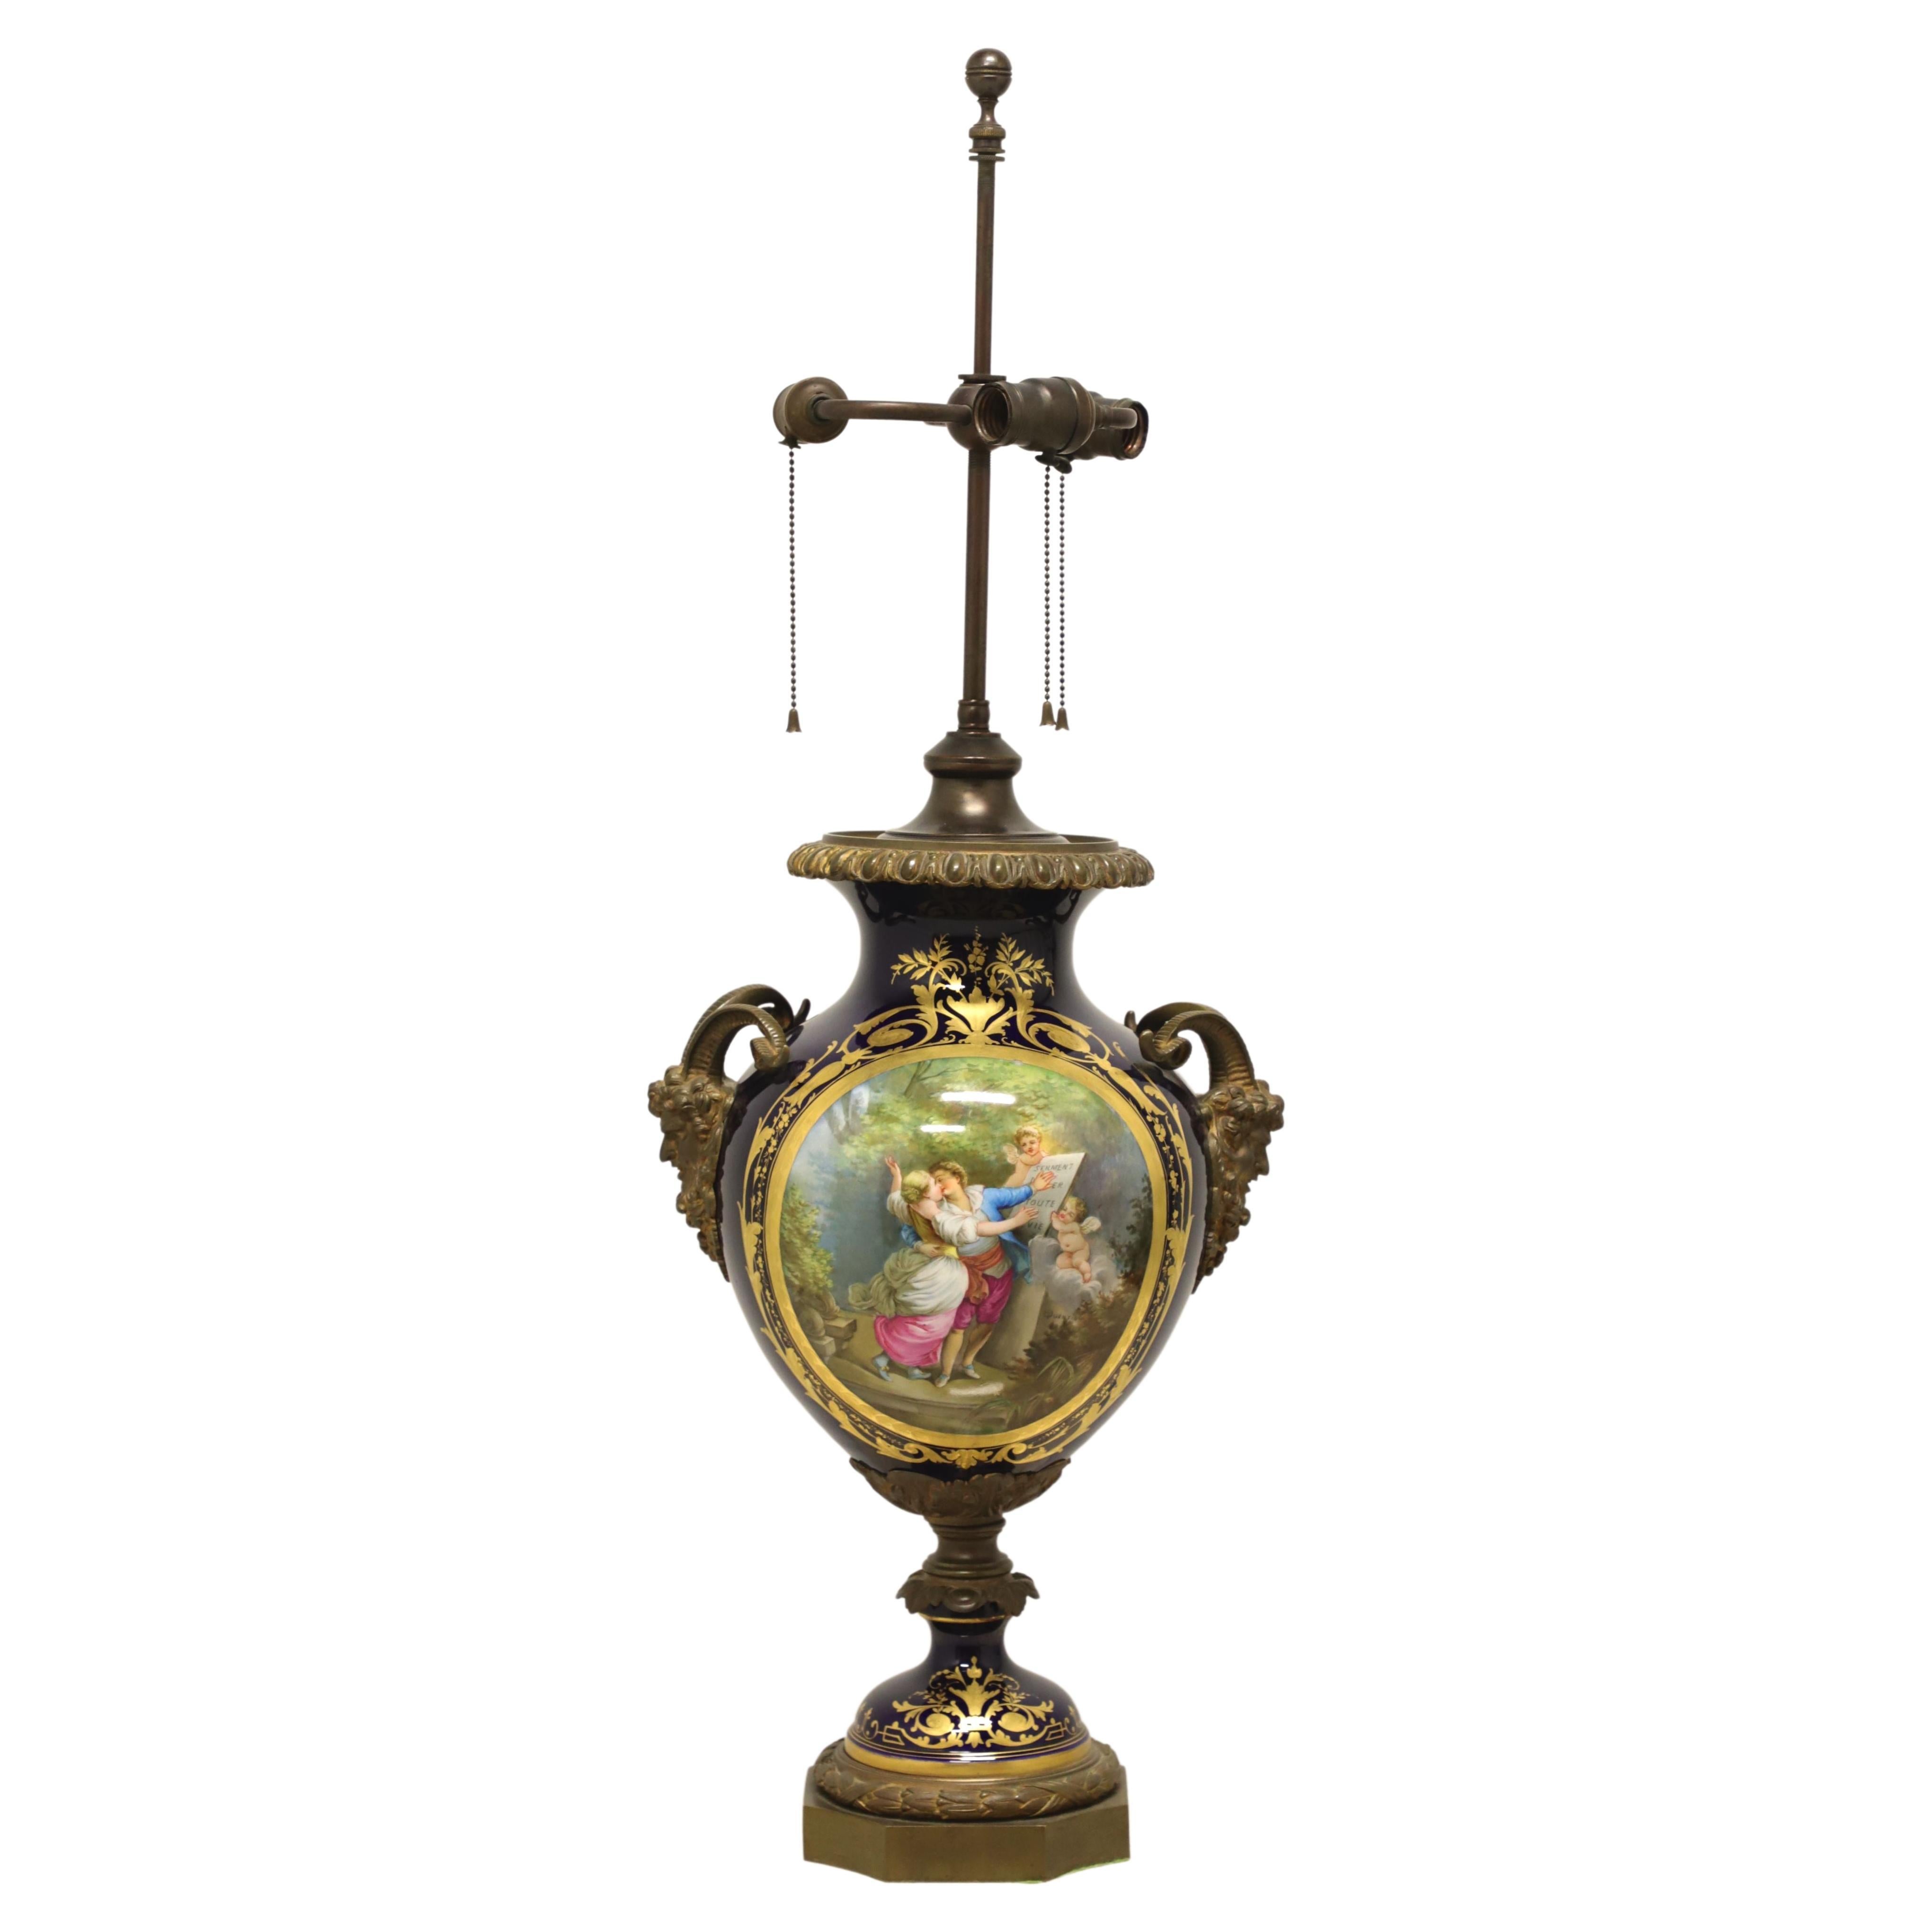 19th Century French Sevres Porcelain with Bronze Ormolu Mounted as a Table Lamp